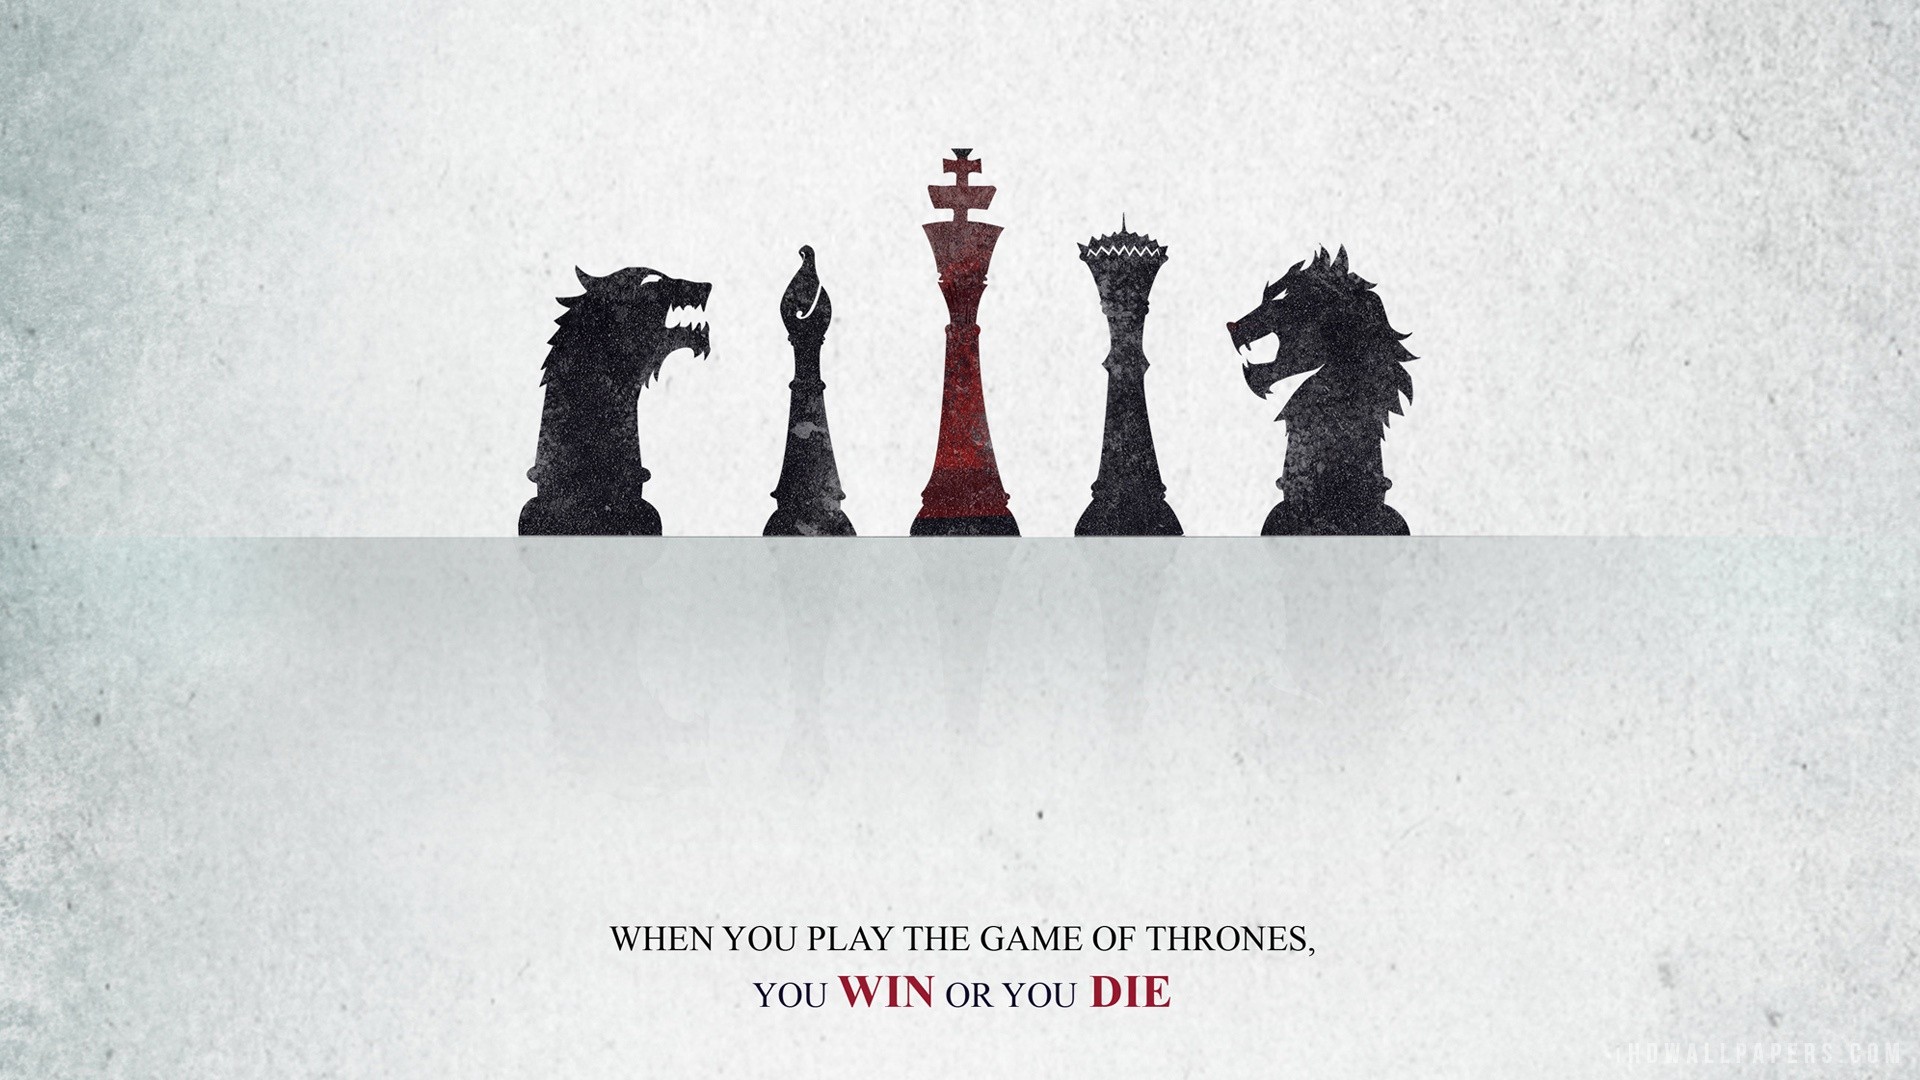 Download Play Game Of Thrones Win Die HD Wallpaper Search more high